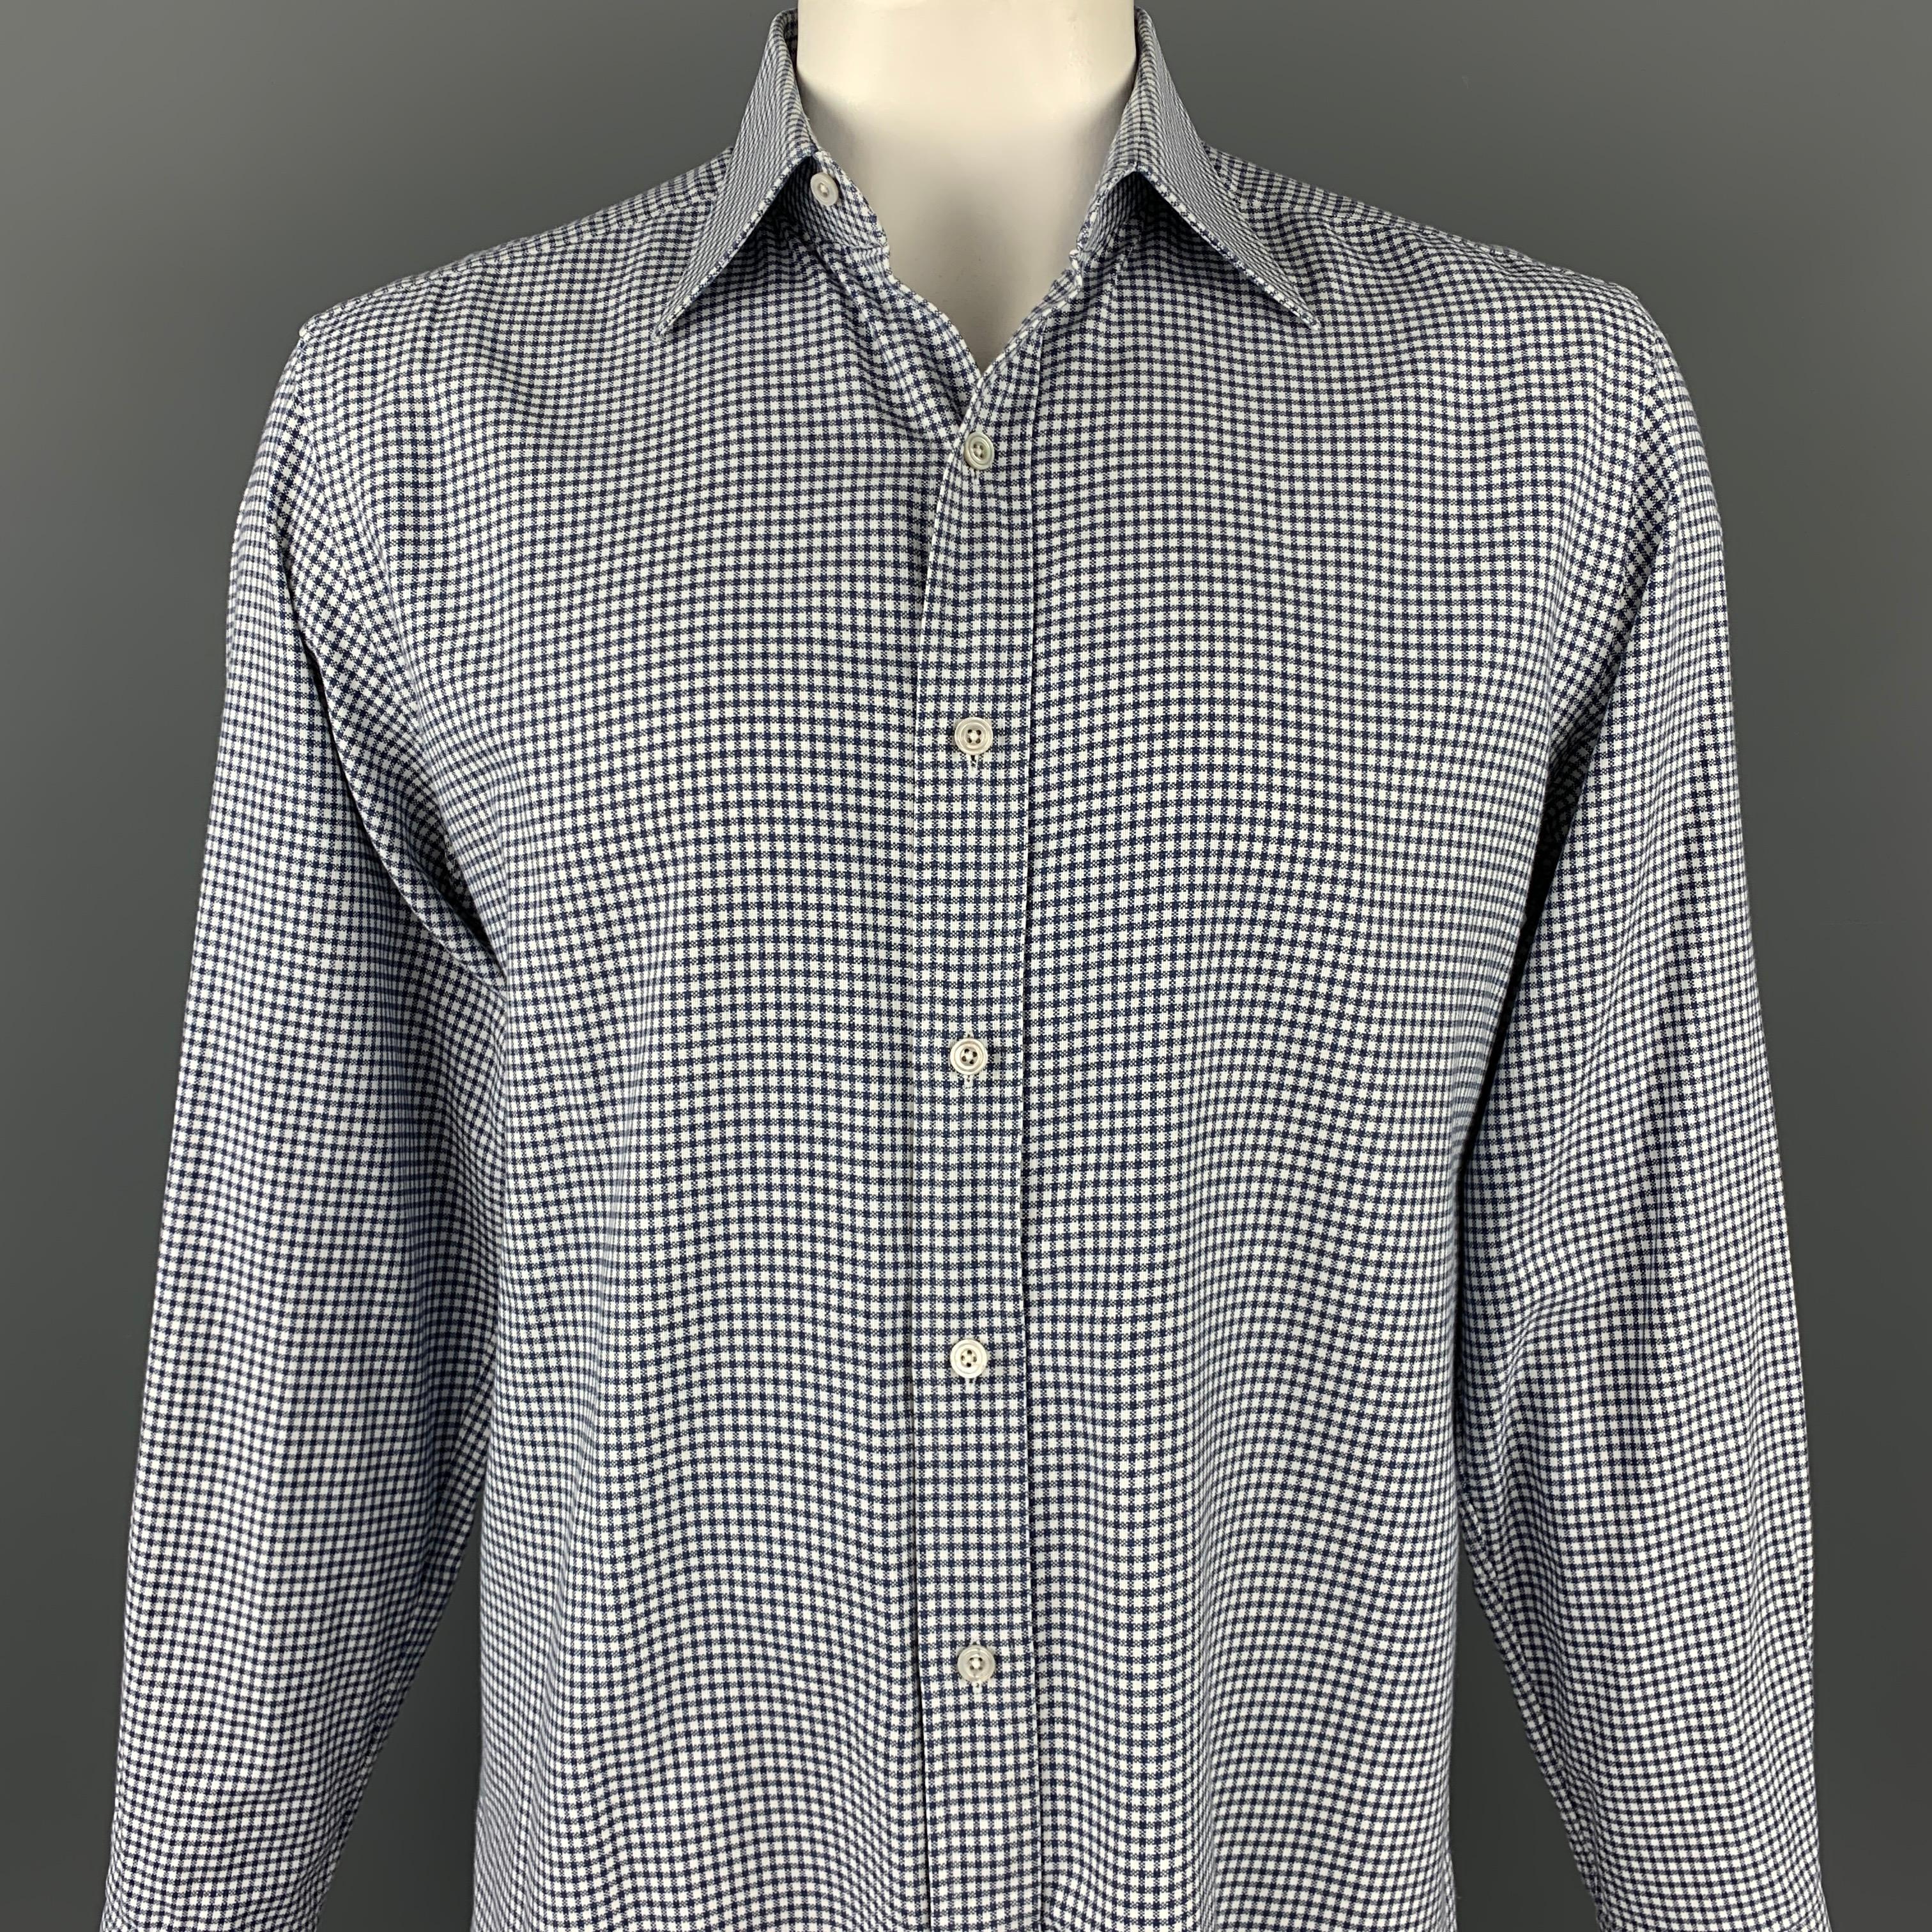 TOM FORD long sleeve shirt comes in a navy & white window pane cotton featuring a button up style and a spread collar. Made in Switzerland.

Very Good Pre-Owned Condition.
Marked: 43/17

Measurements:

Shoulder: 19 in.
Chest: 48 in.
Sleeve: 27